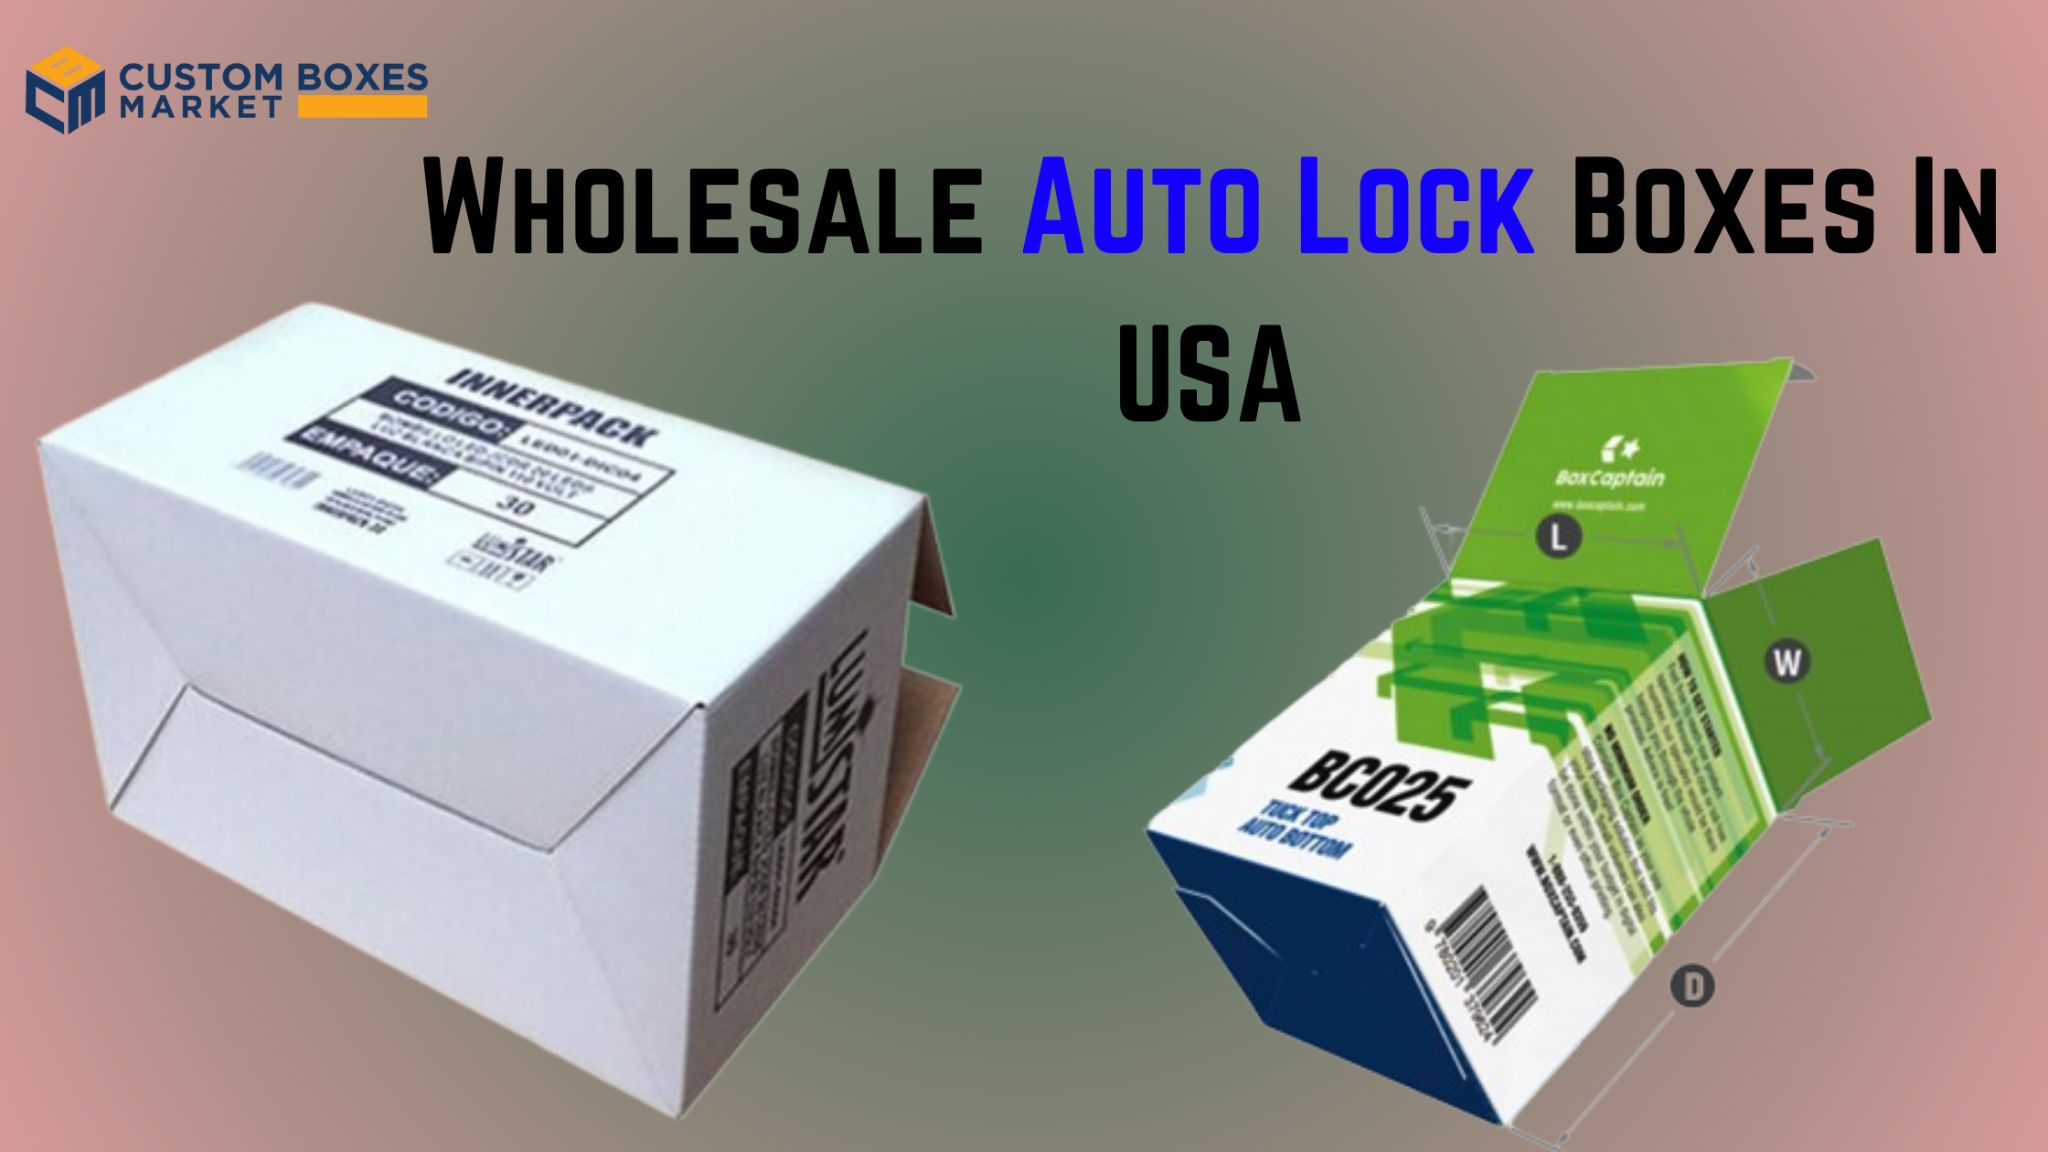 Custom Auto Lock Boxes Wholesale For Secure Product Storage And Shipping